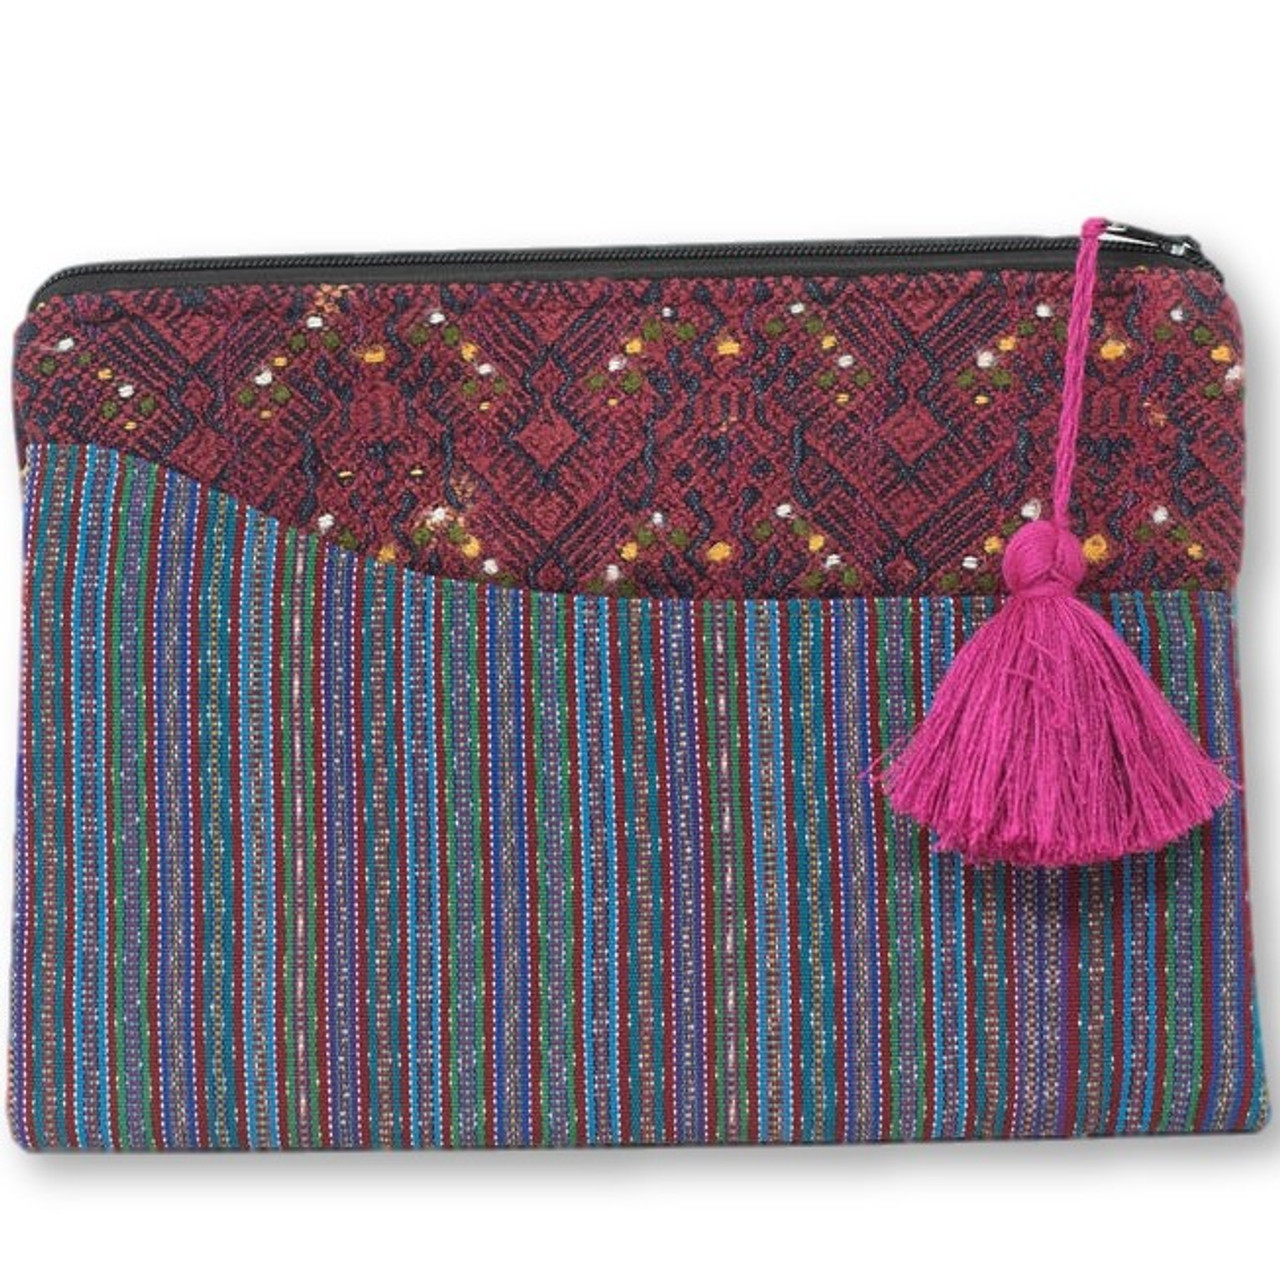 Up-cycled Hand Woven Zip Purse from Guatemala, Made from a Traditional Blouse "Huipil" and Skirt "Corte" 10.75" x 7.75" with Tassel